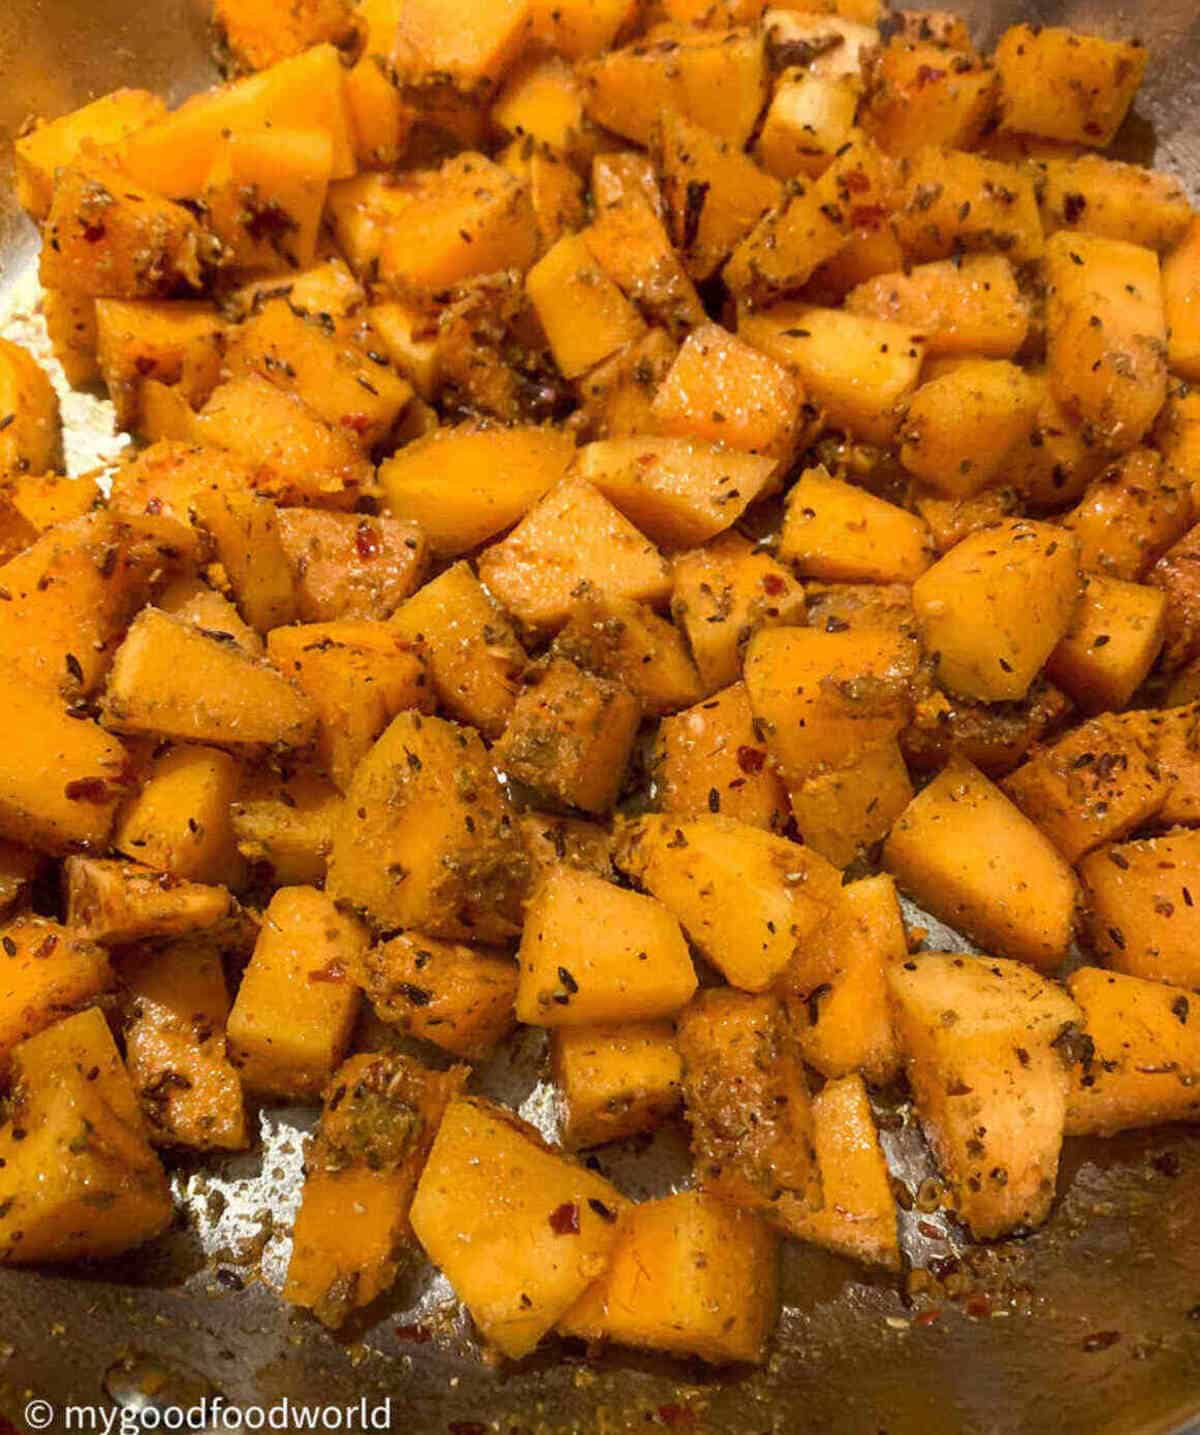 Butternut squash cubes coated with spices sauteeing in a frying pan.